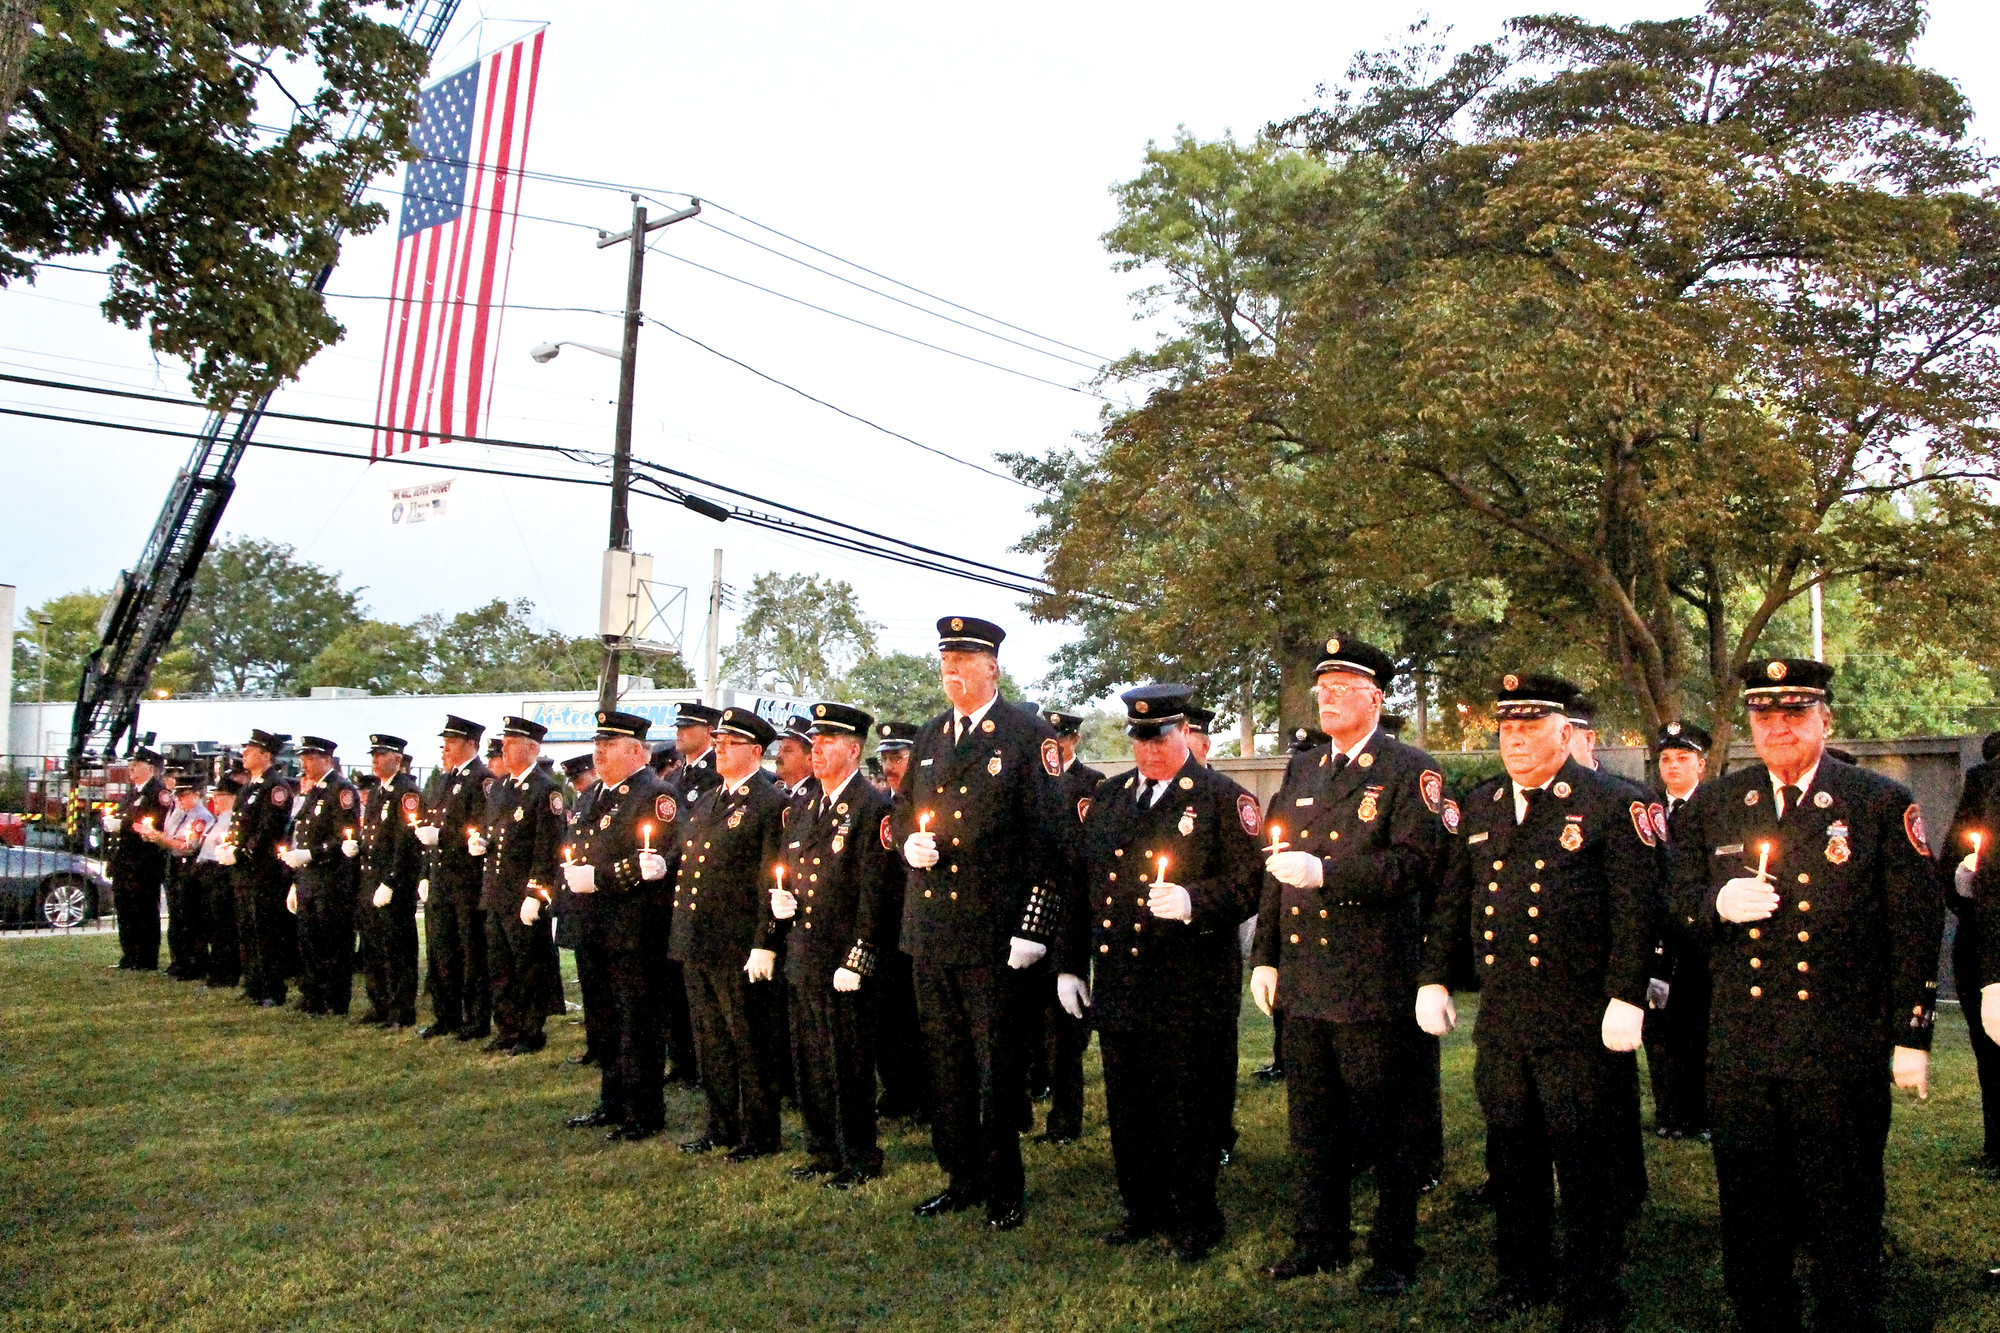 A candlelight vigil hosted by the East Meadow Fire Department last Friday in Veterans Memorial Park marked the 14th anniversary of the Sept. 11 World Trade Center attacks. Some 300 residents joined the department to pay their respects.